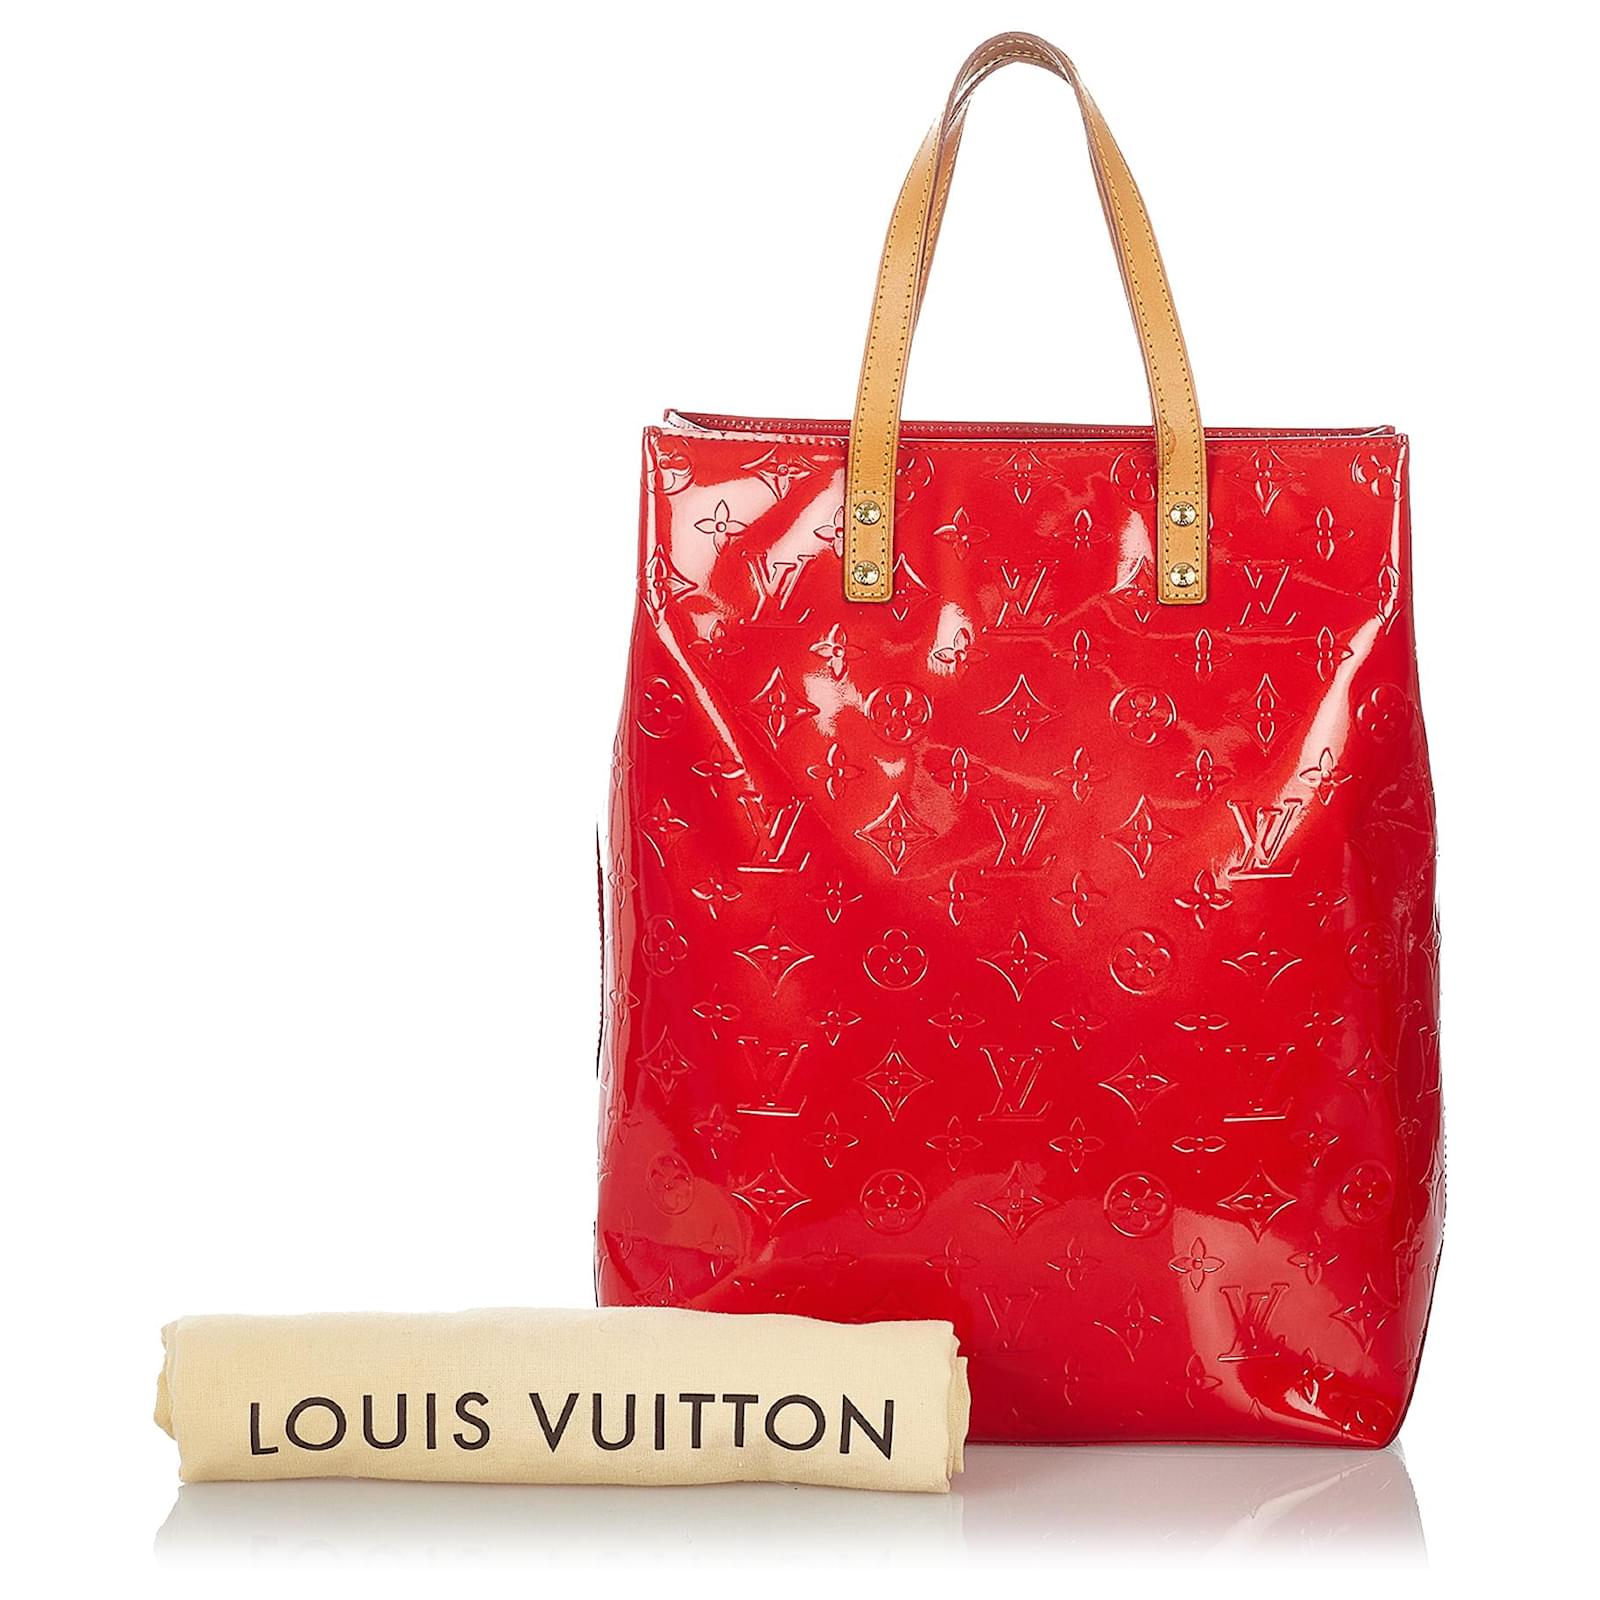 Louis Vuitton Vernis Reade MM Small Tote Hand Bag in Red Colour